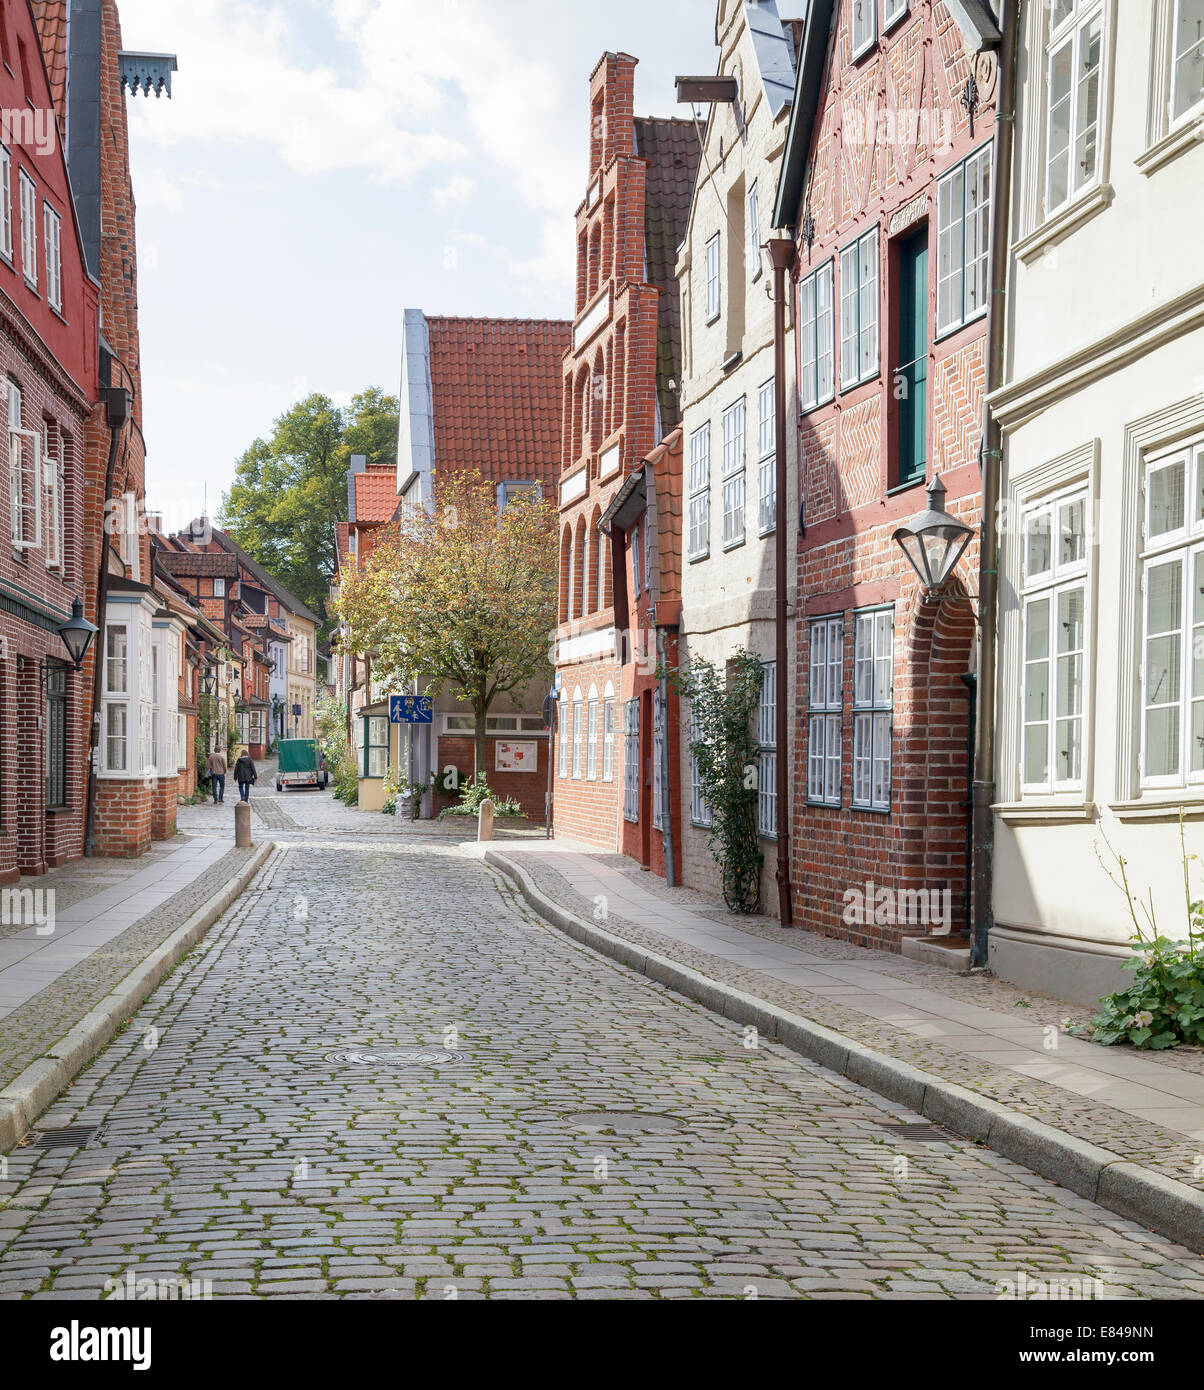 typical street in the old town, Auf dem Meer, Luneburg, Lower Saxony, Germany Stock Photo